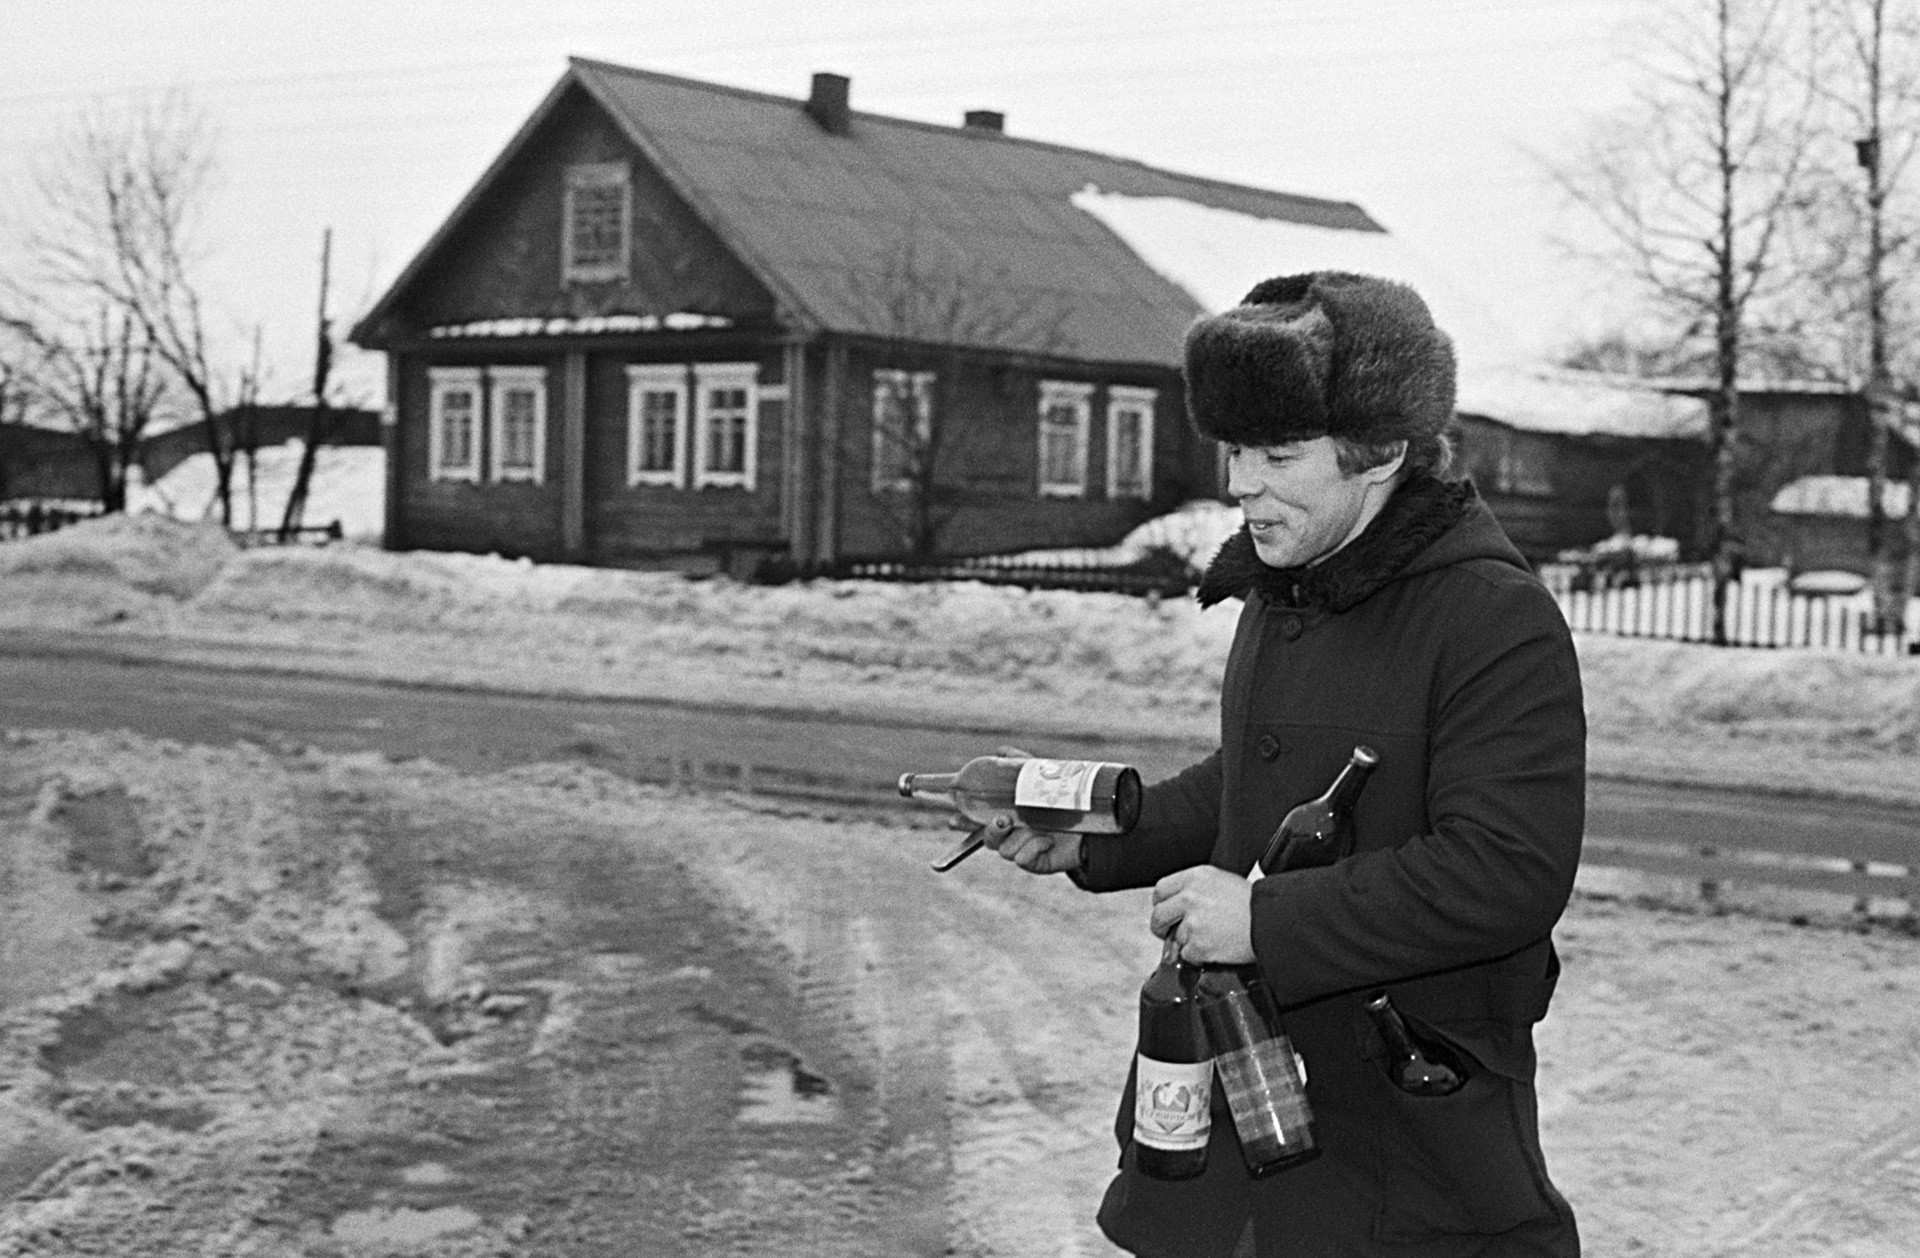 A local holding bottles in a Soviet village, 1990.